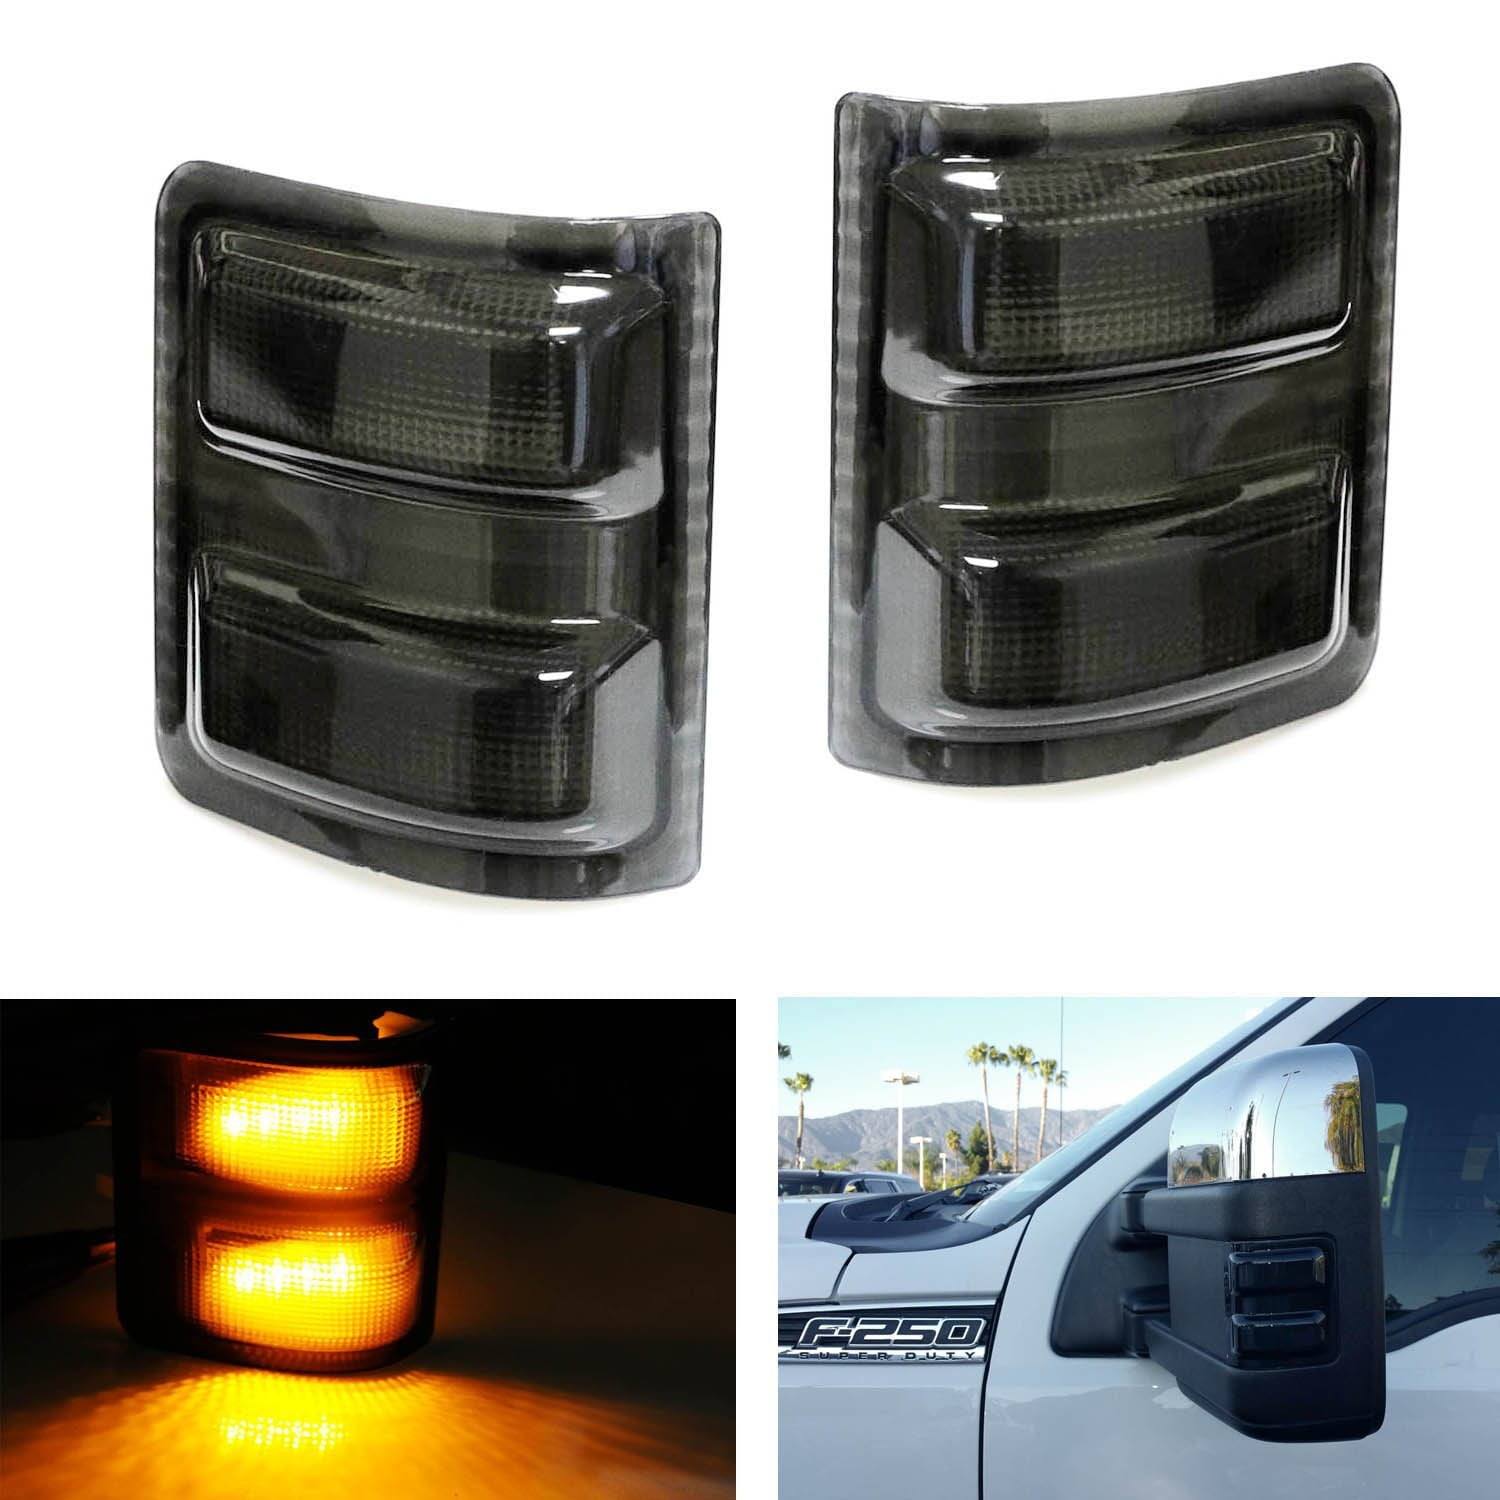 Restyling Factory 2008-2016 Ford Super Duty F250+F350/F450/F550/F660 Smoke Lens Mirror Amber LED Light Kit Set 1 Pair Replacement for Factory OE Towing Mirror Turn Signal Light